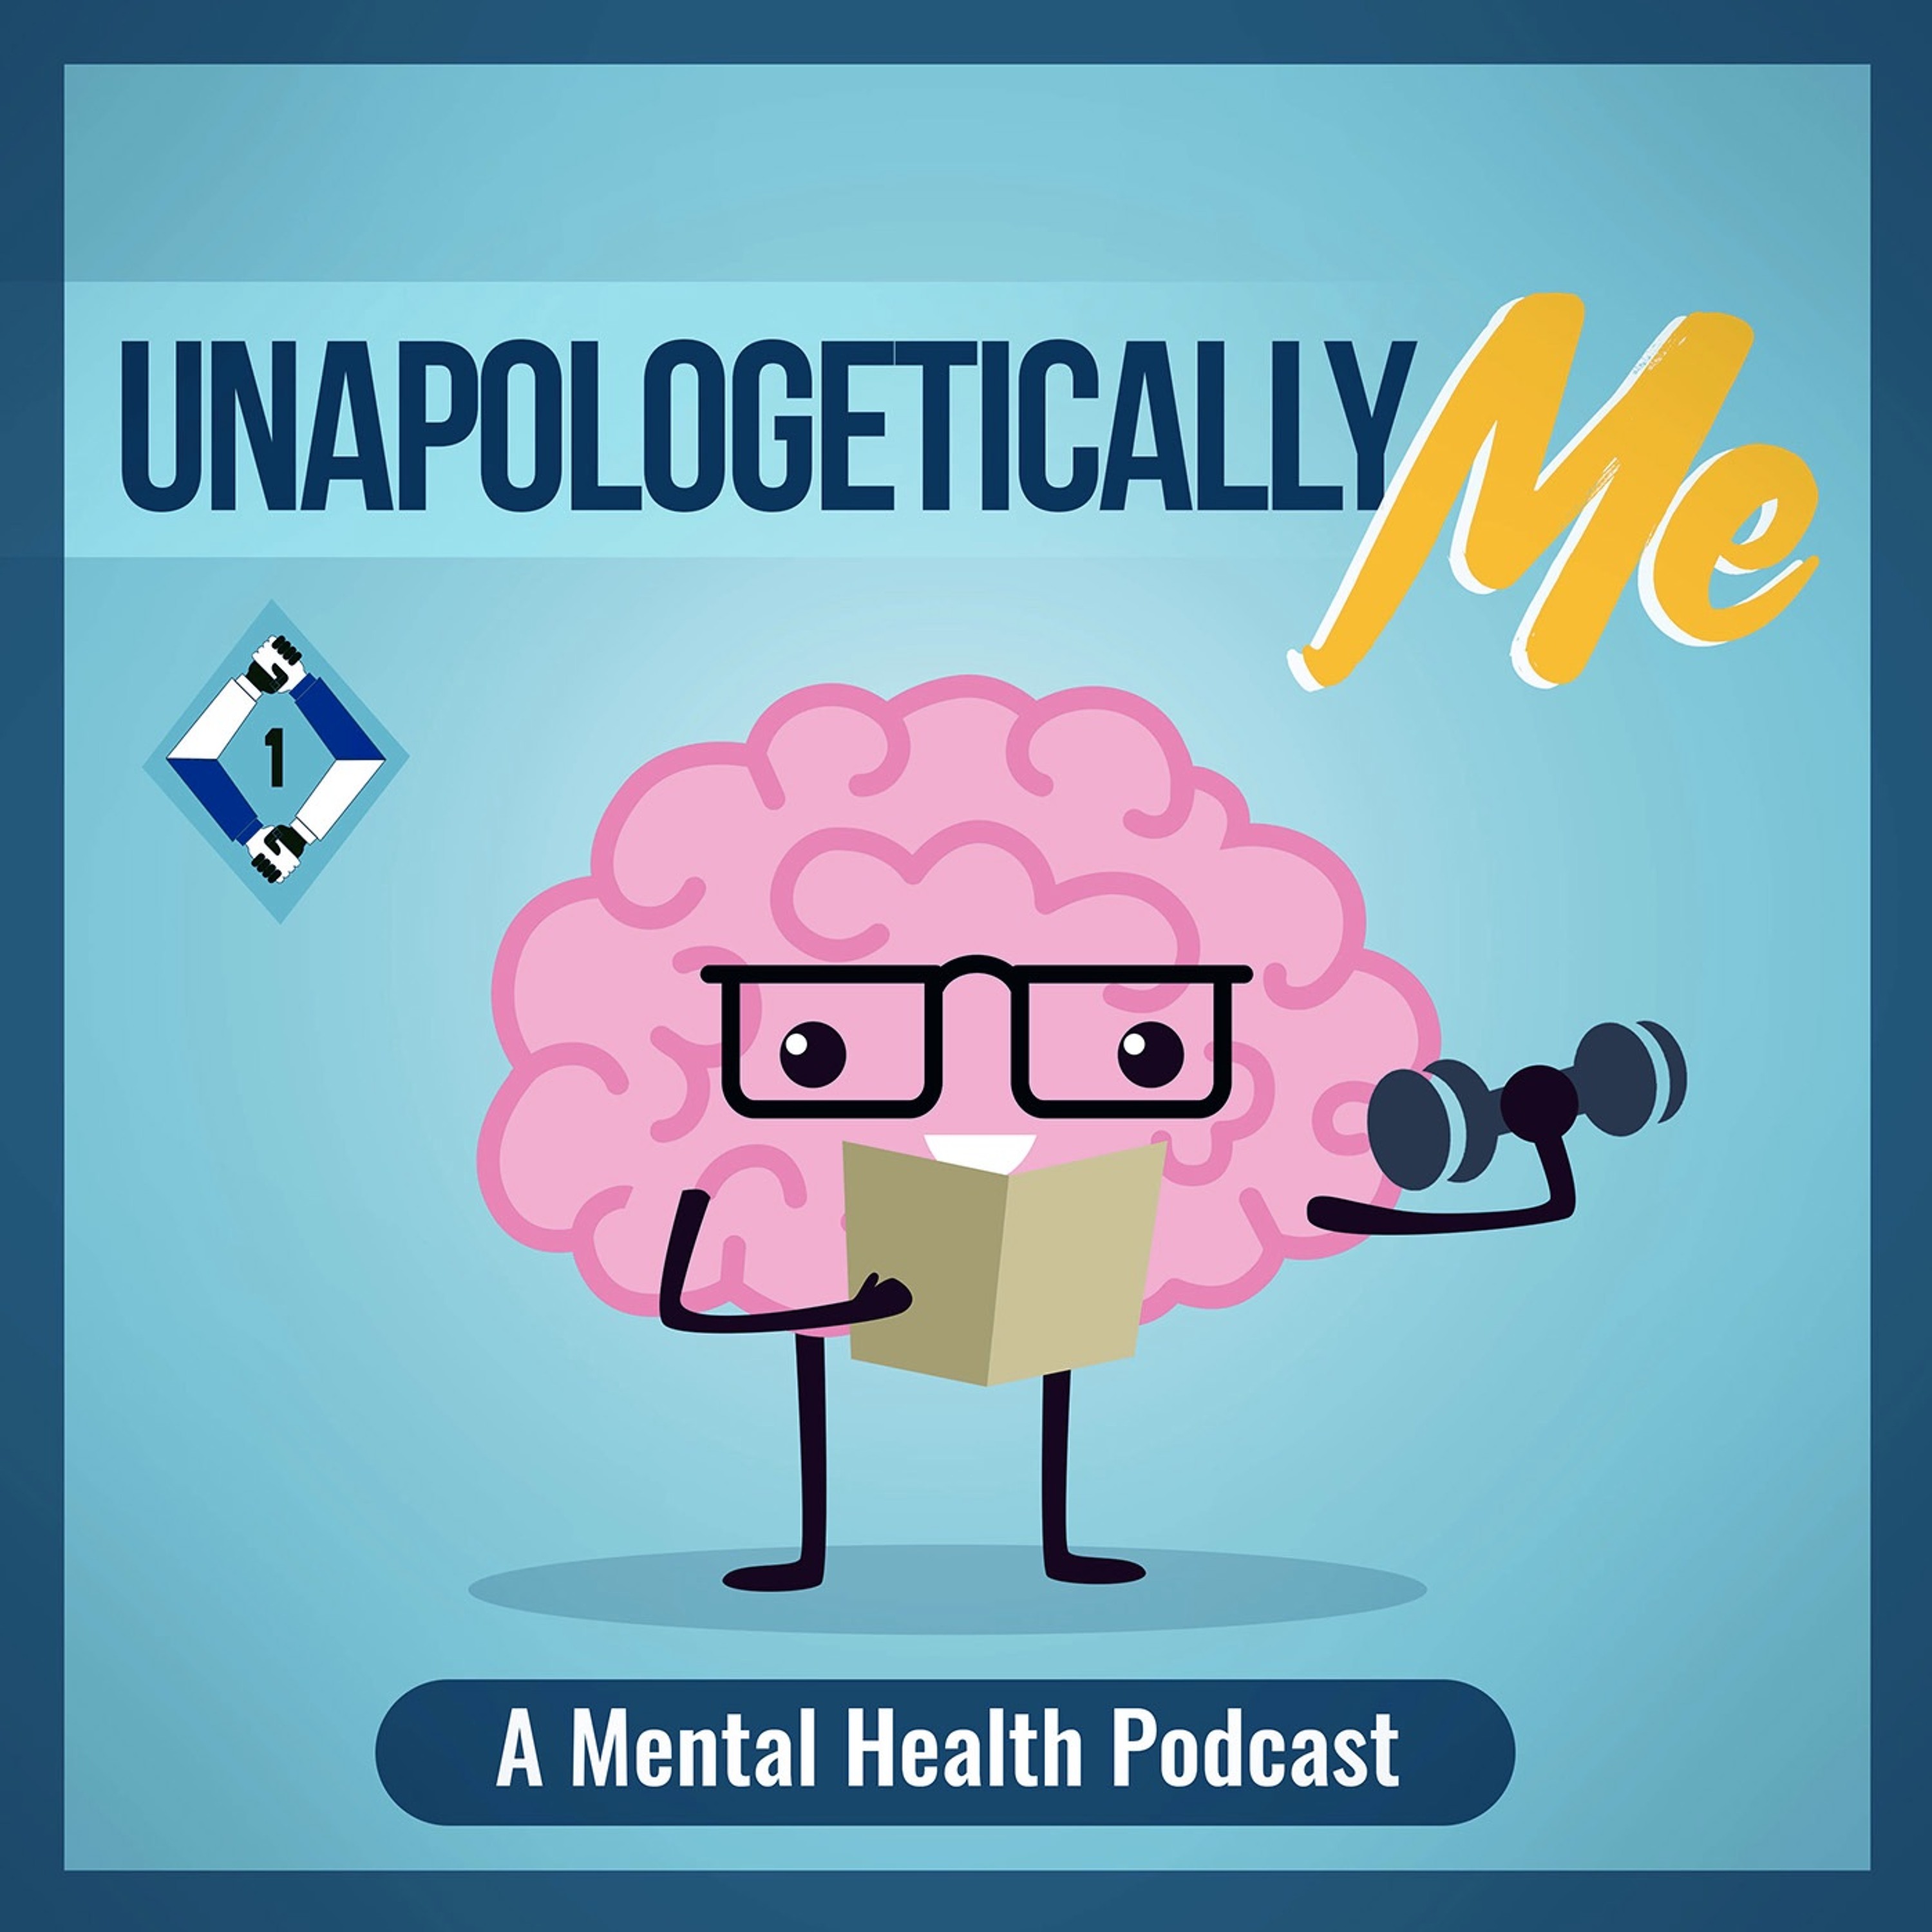 Unapologetically Me: A Mental Health Podcast - How To Prevent Burnout